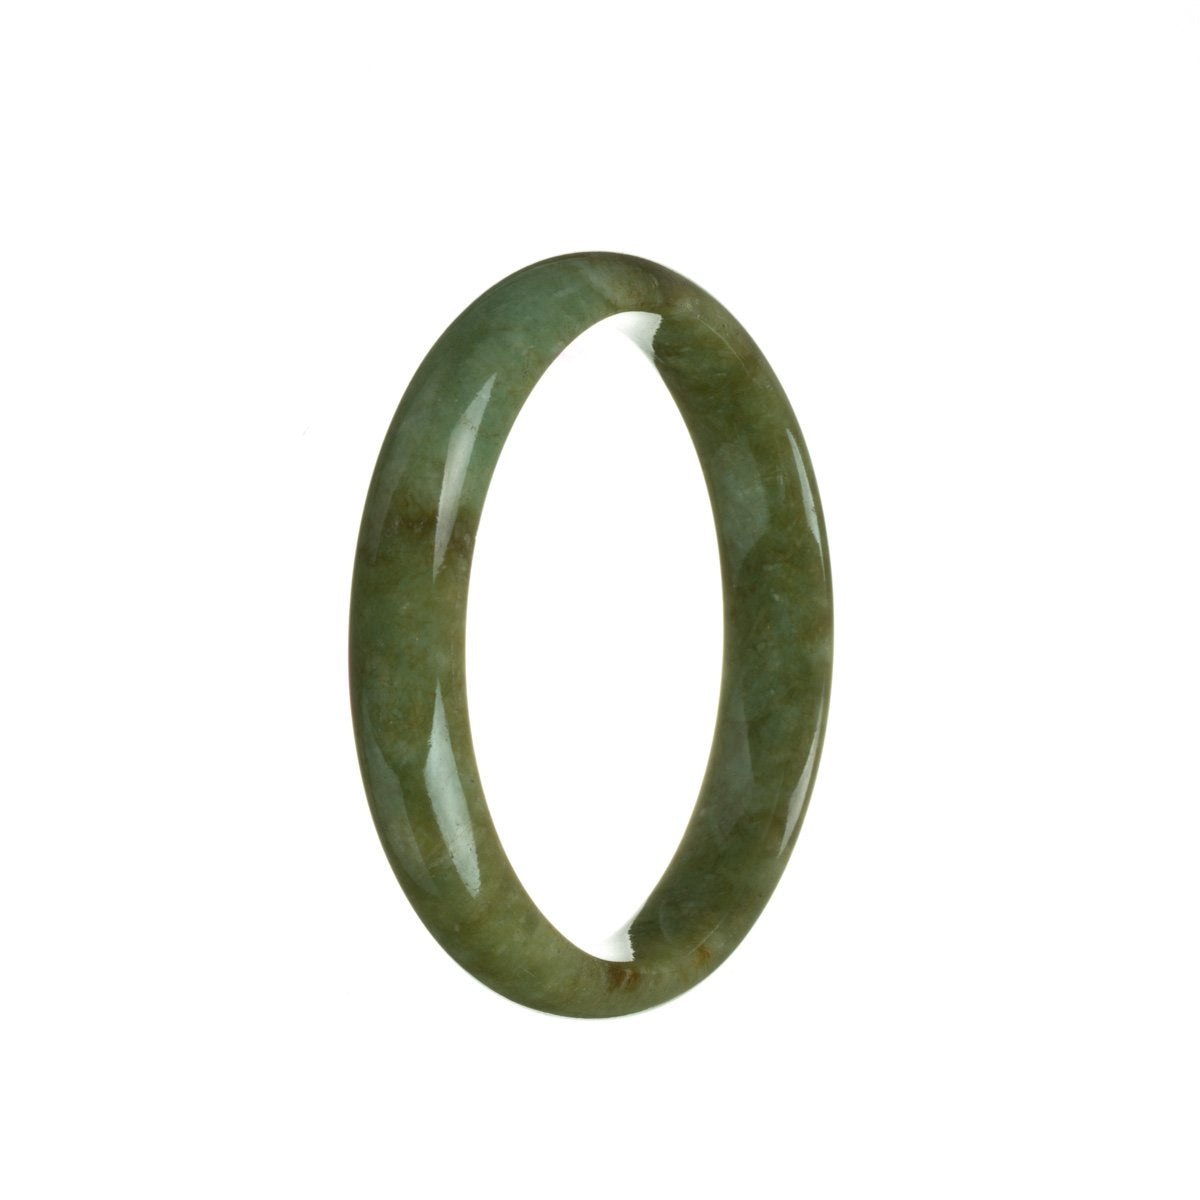 A half-moon shaped bracelet made of natural, untreated brownish green jadeite measuring 57mm. Exquisite craftsmanship by MAYS GEMS.